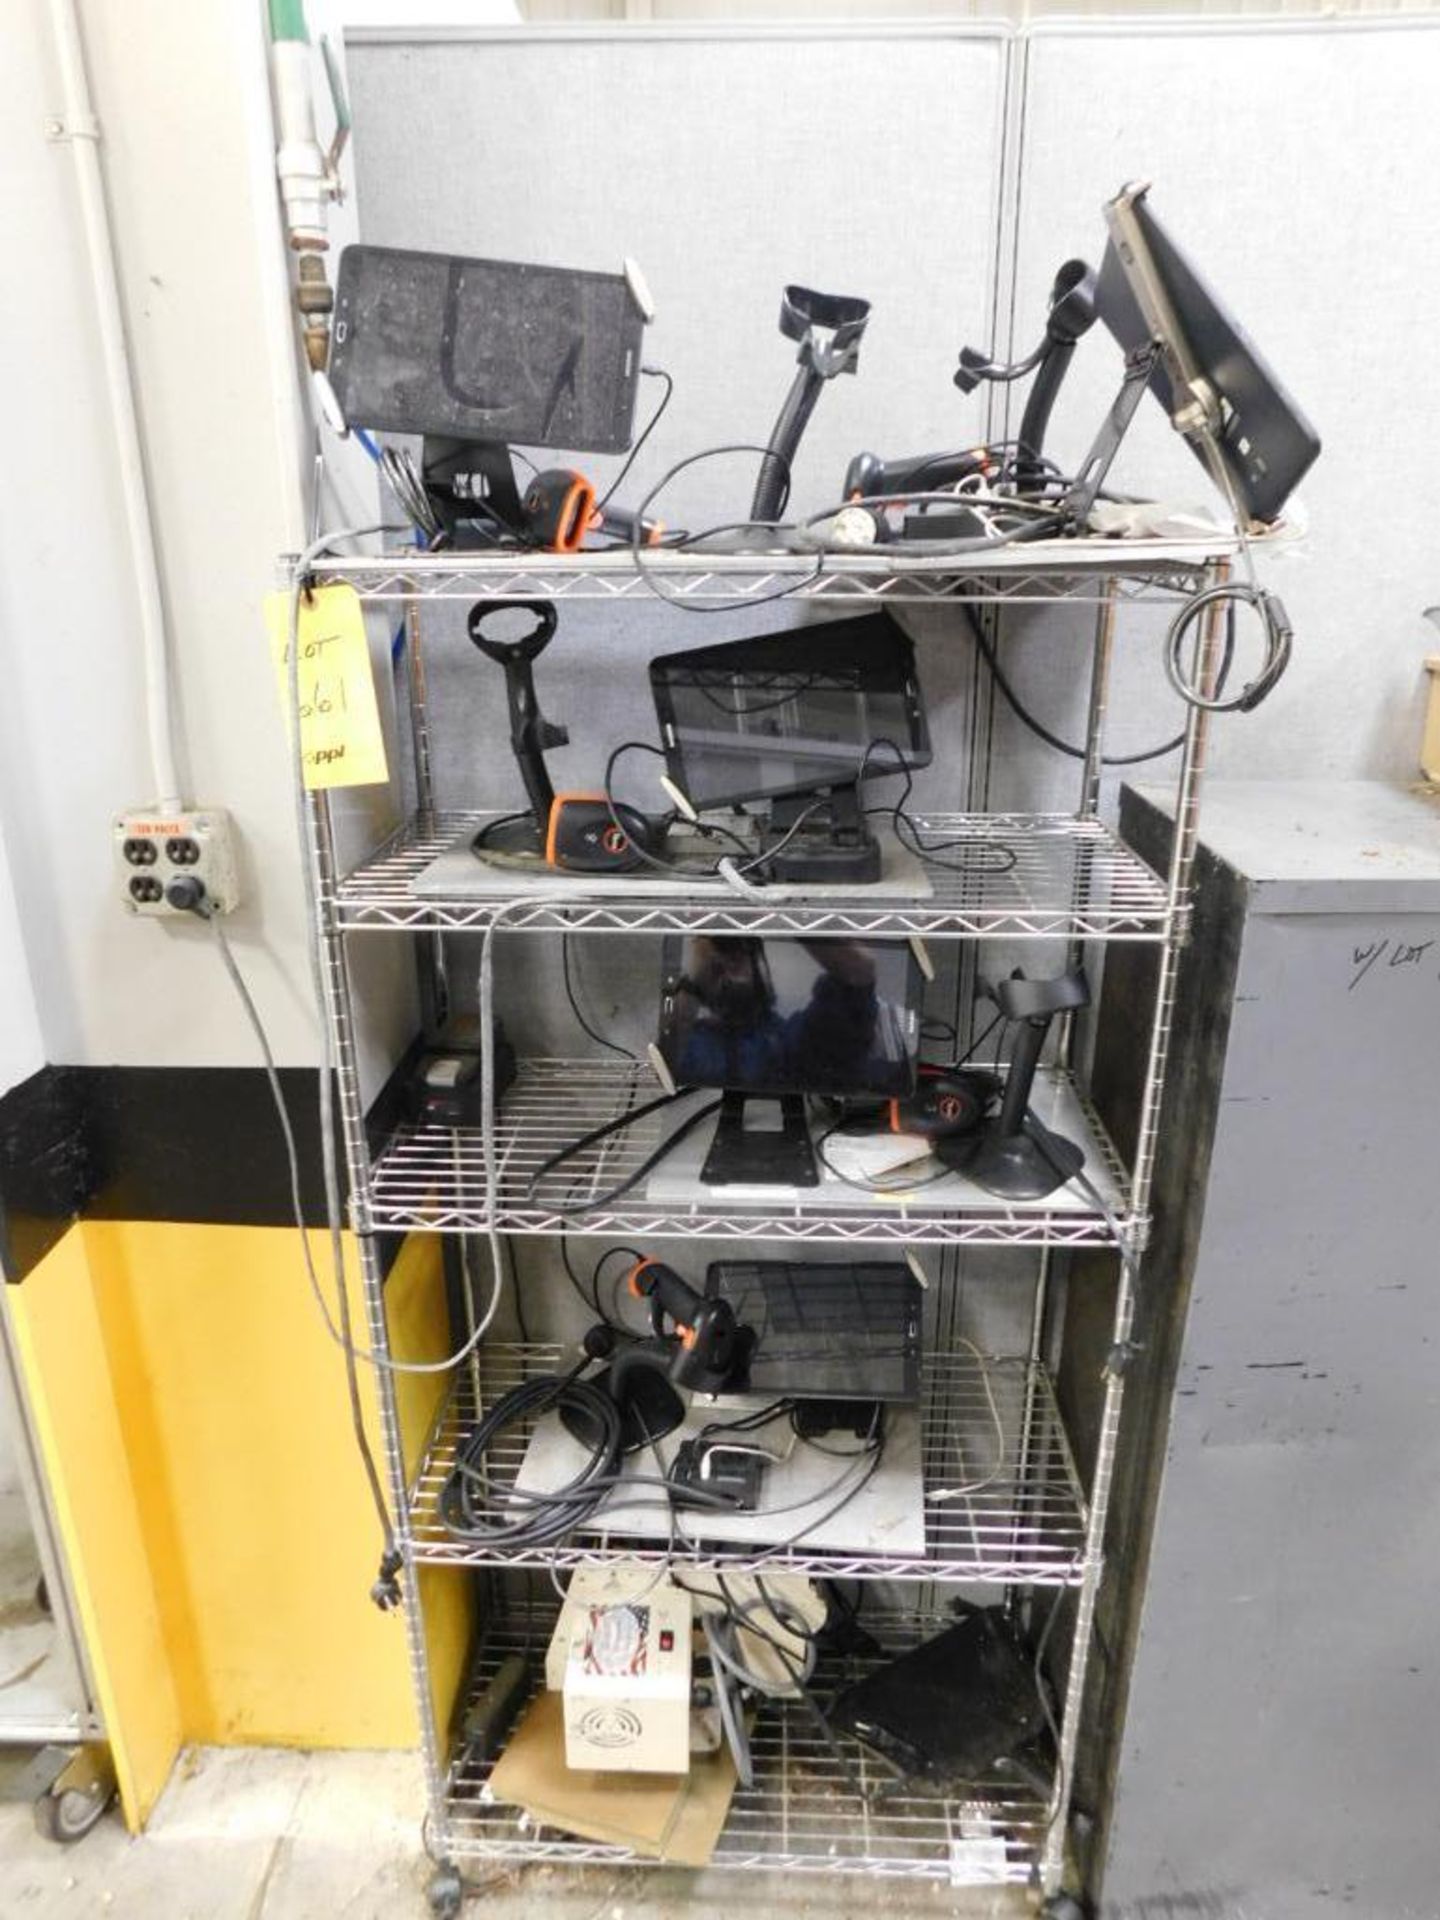 LOT: Rolling Rack w/Scanning Systems, Samsung Tablets, Tera Scanners